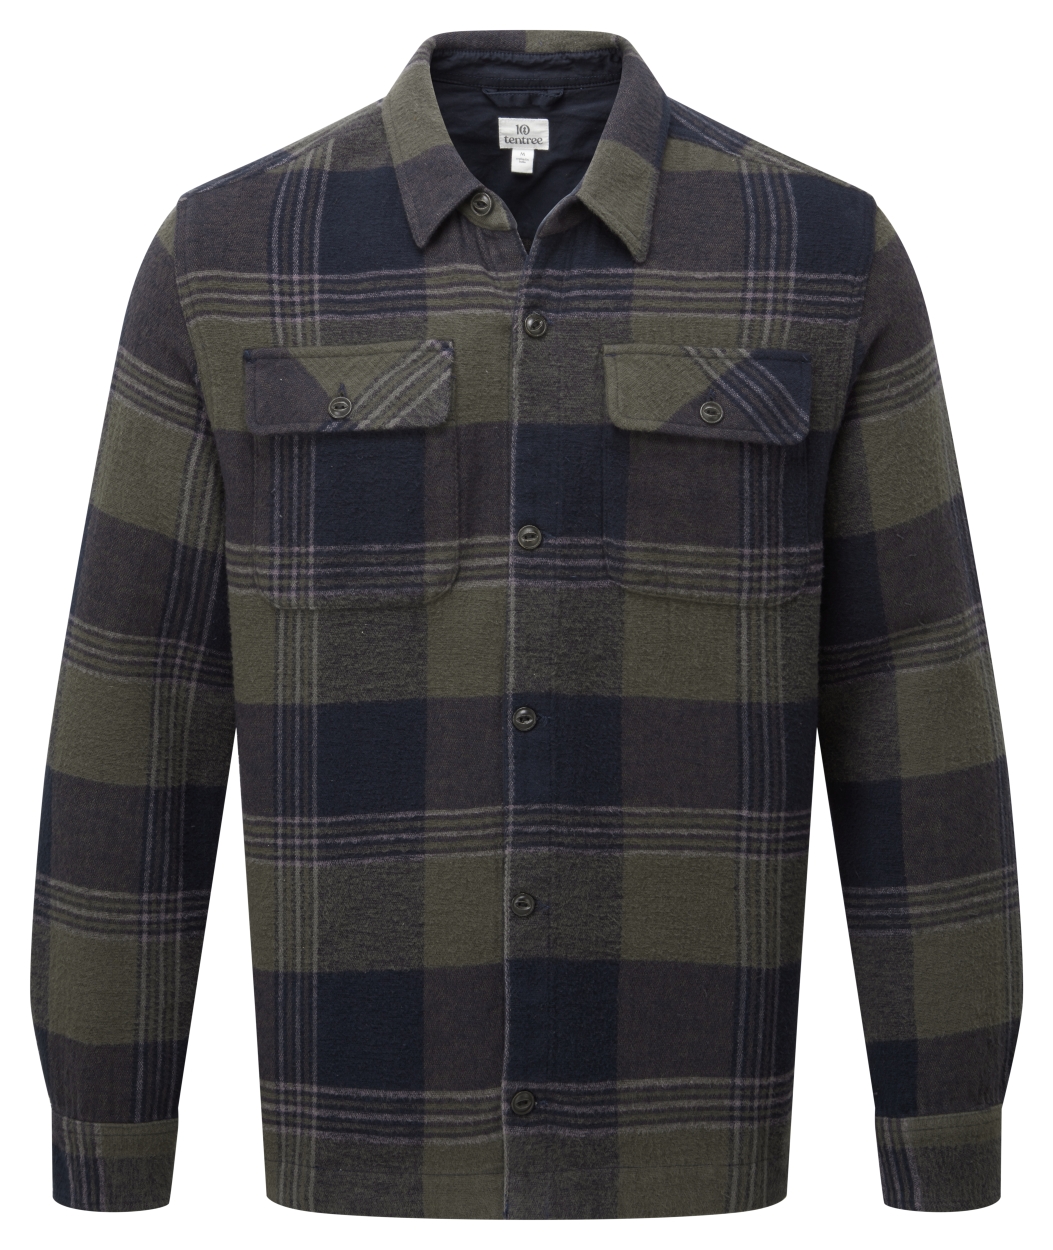 Heavy Weight Flannel Shirt, black olive green